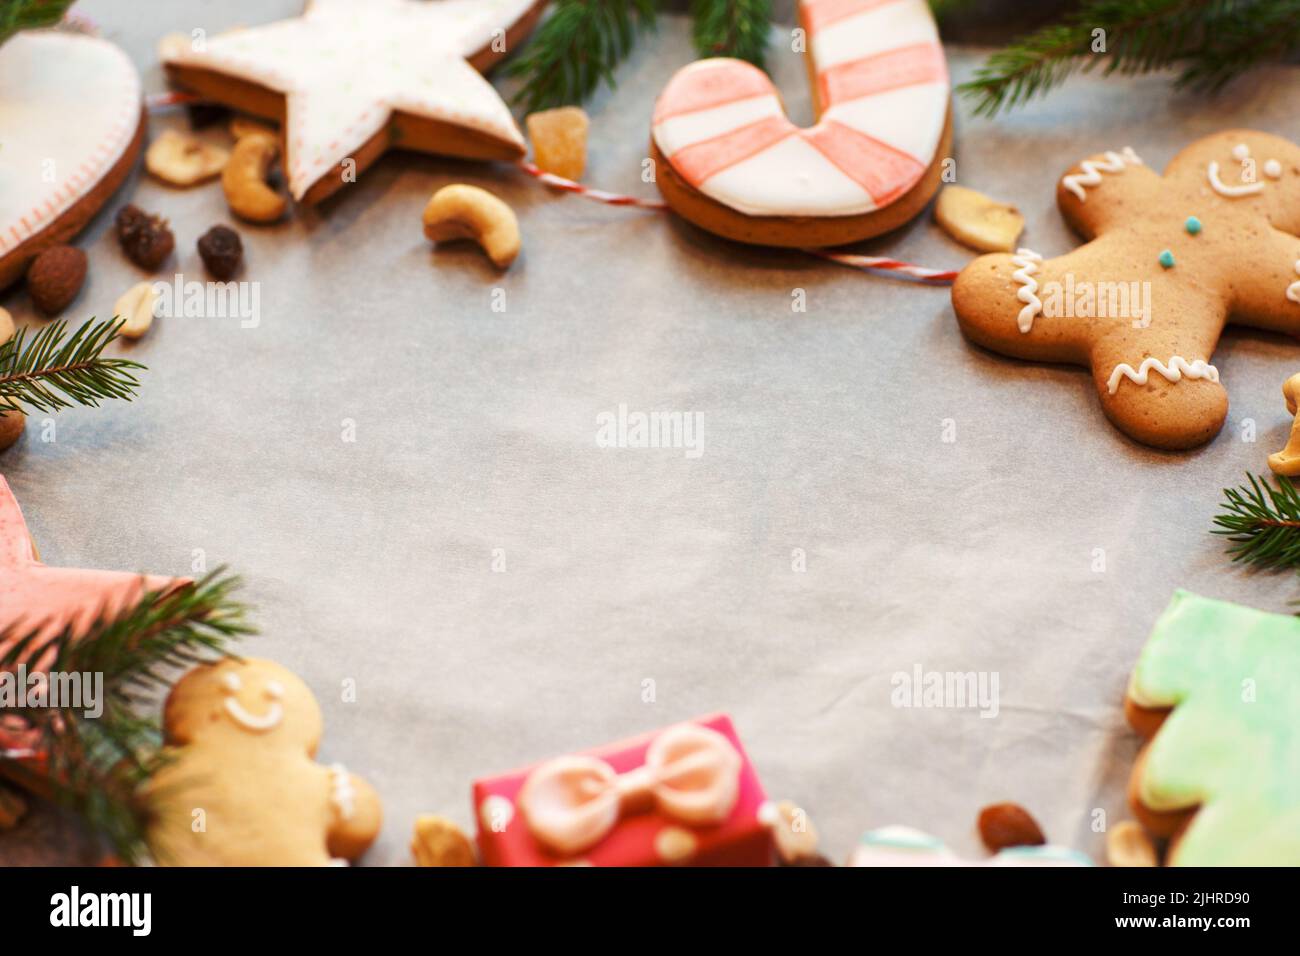 Gingerbread cookies frame on culinary parchment Stock Photo